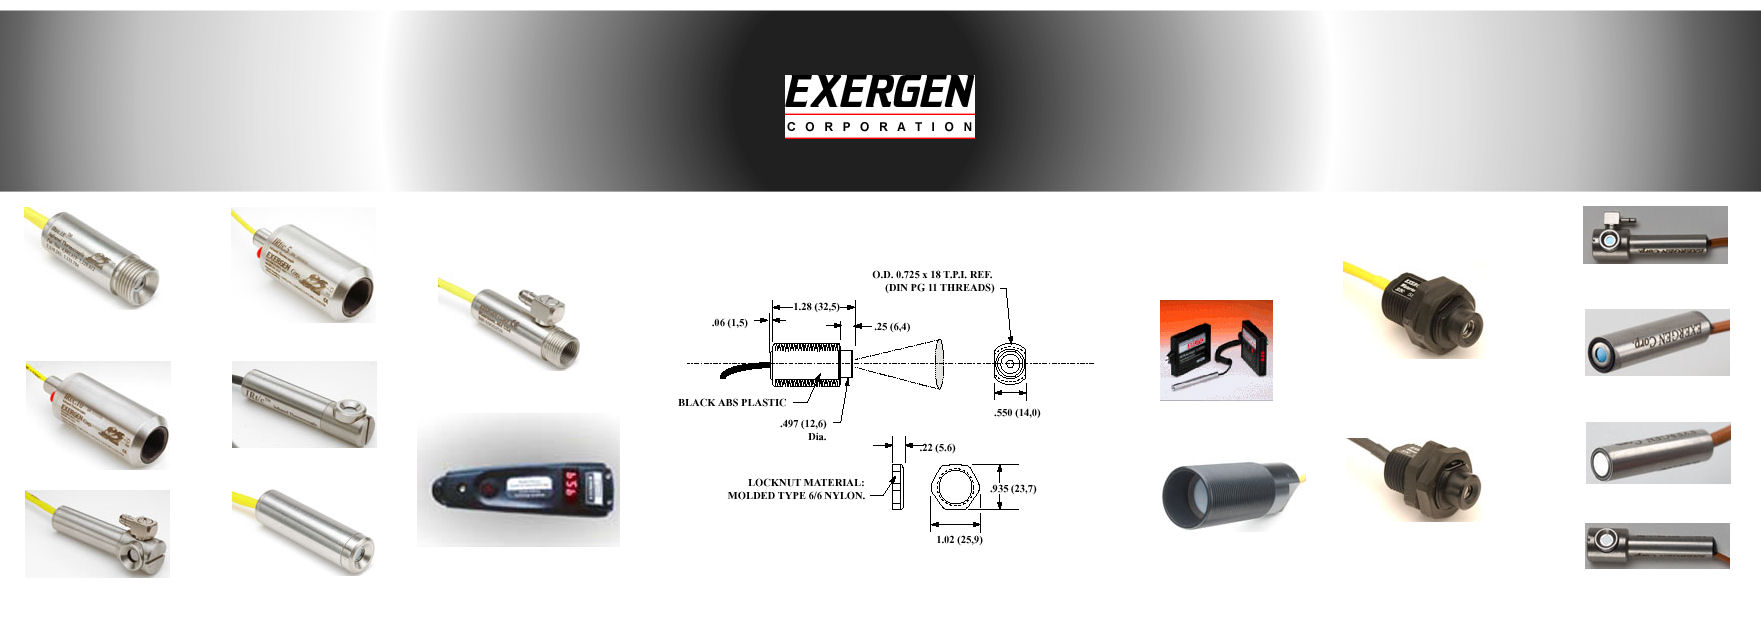 Exergen Infrared Thermocouples